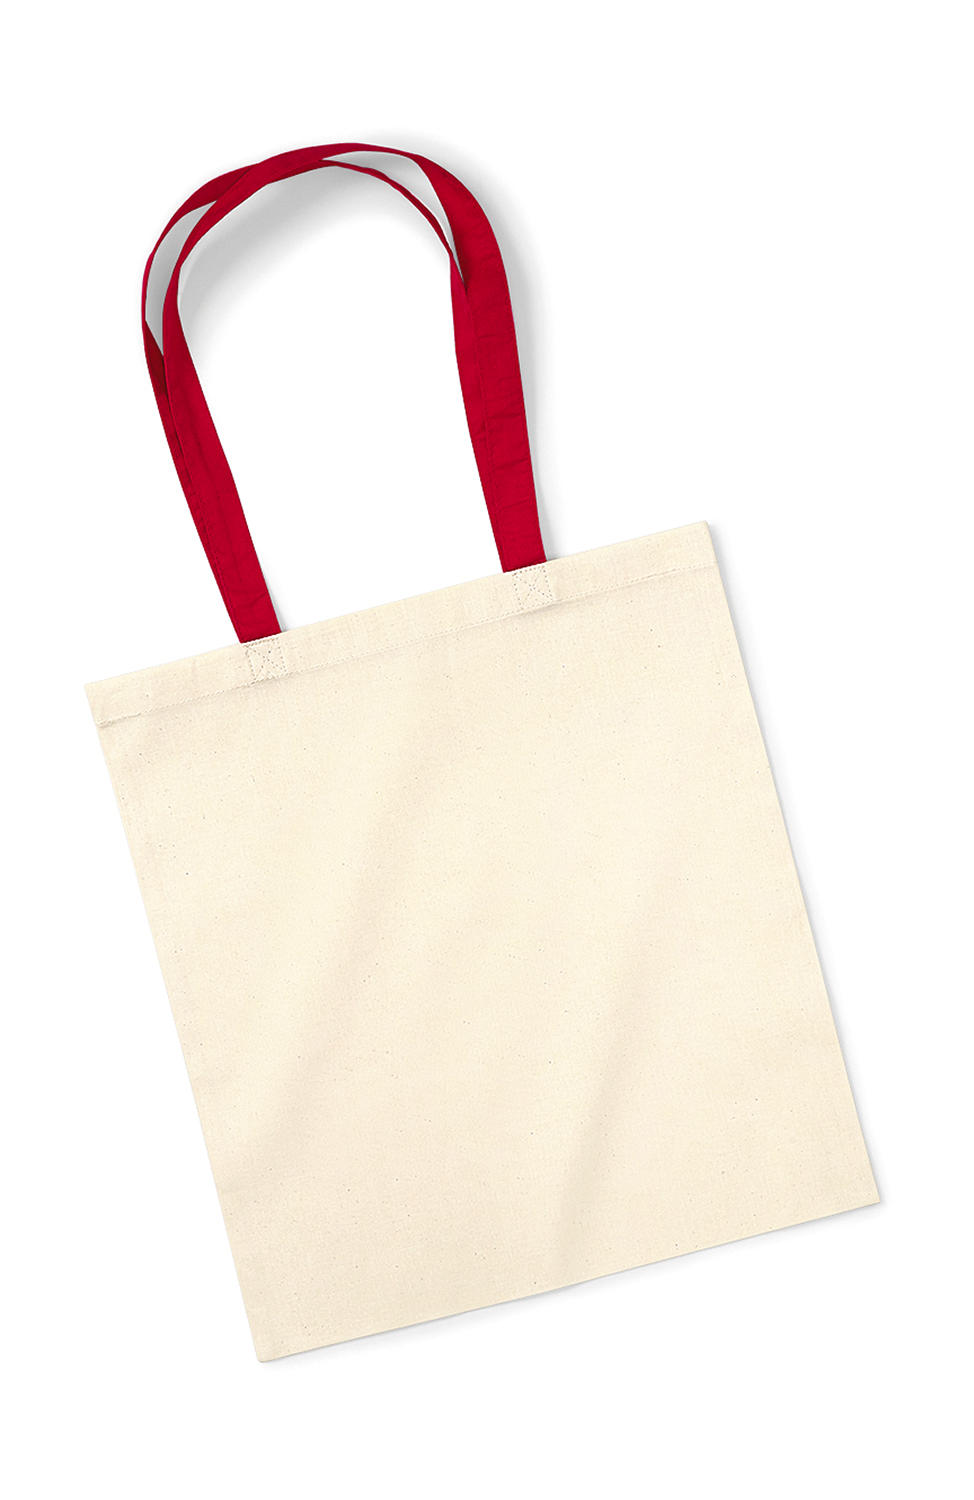  Bag for Life - Contrast Handles in Farbe Natural/Classic Red